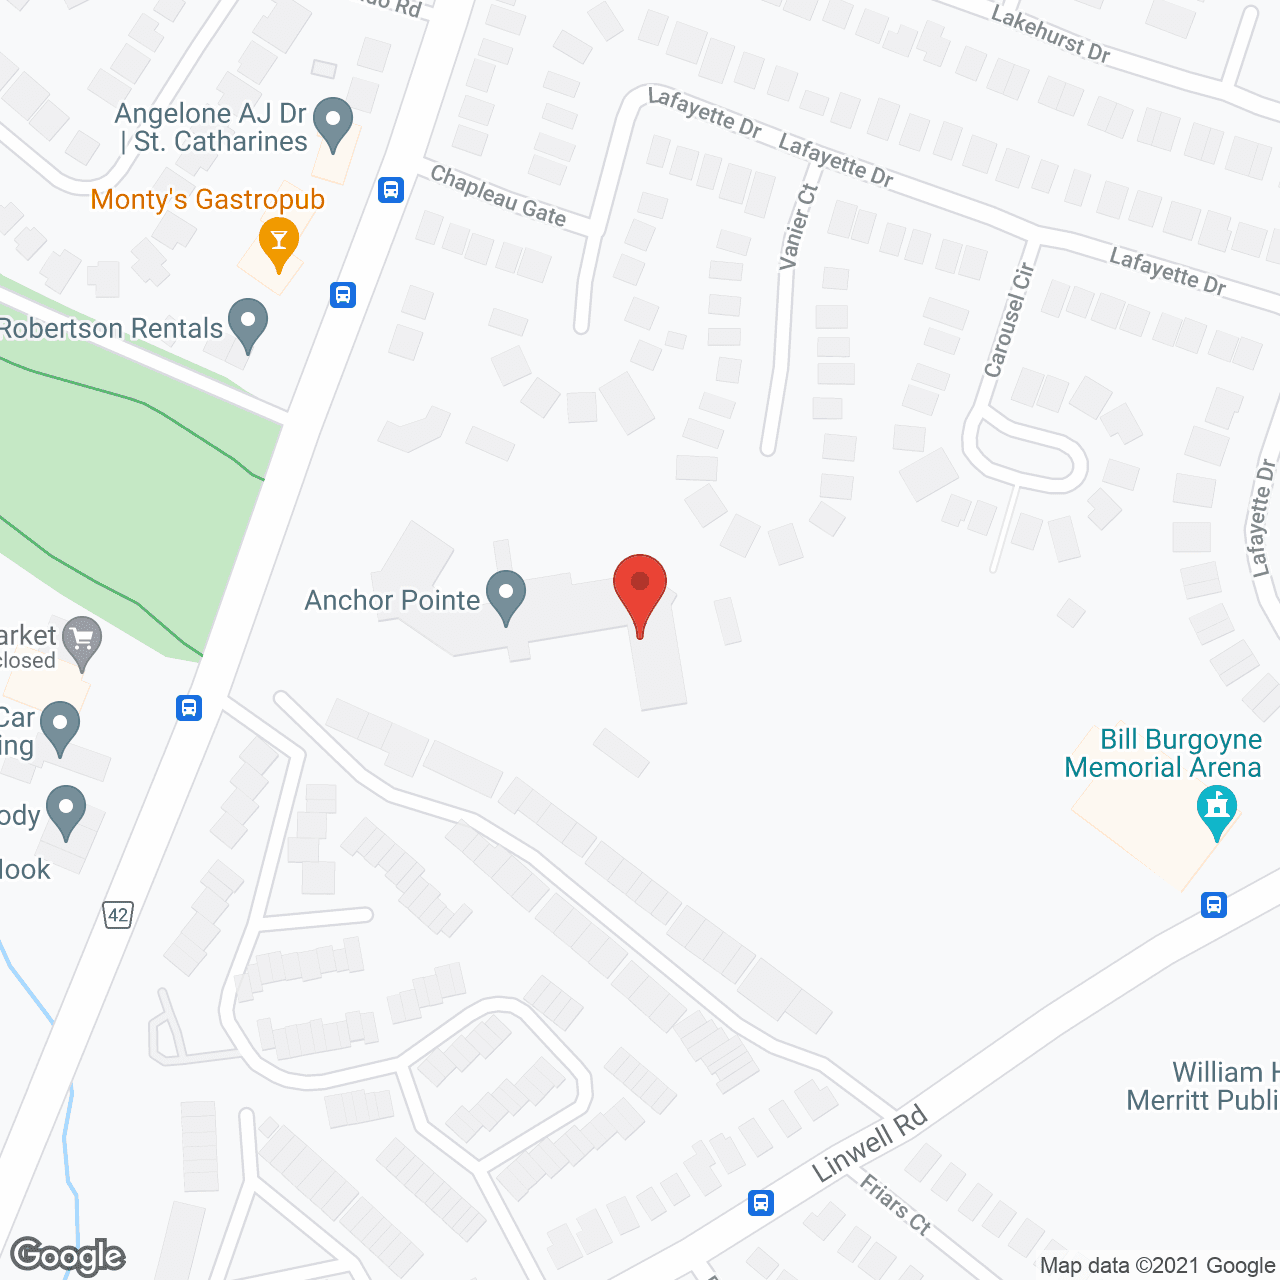 Anchor Pointe in google map